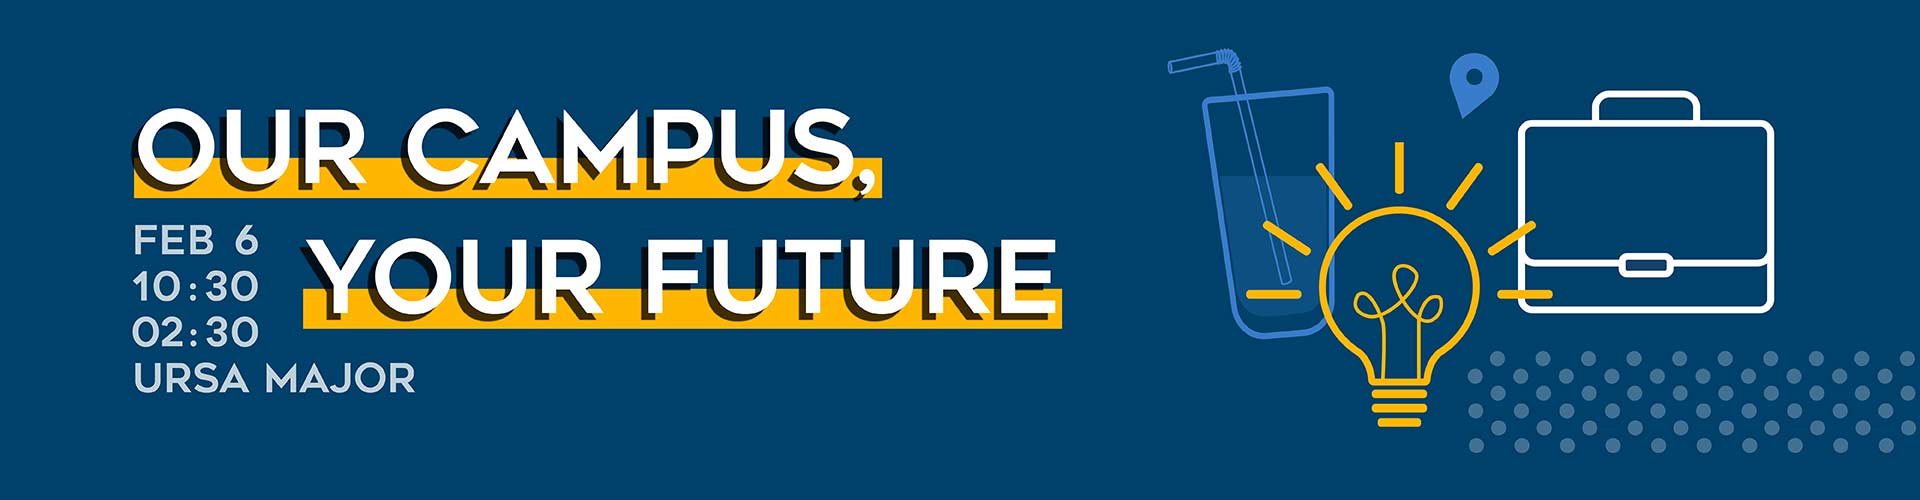 Our Campus Your Future Banner